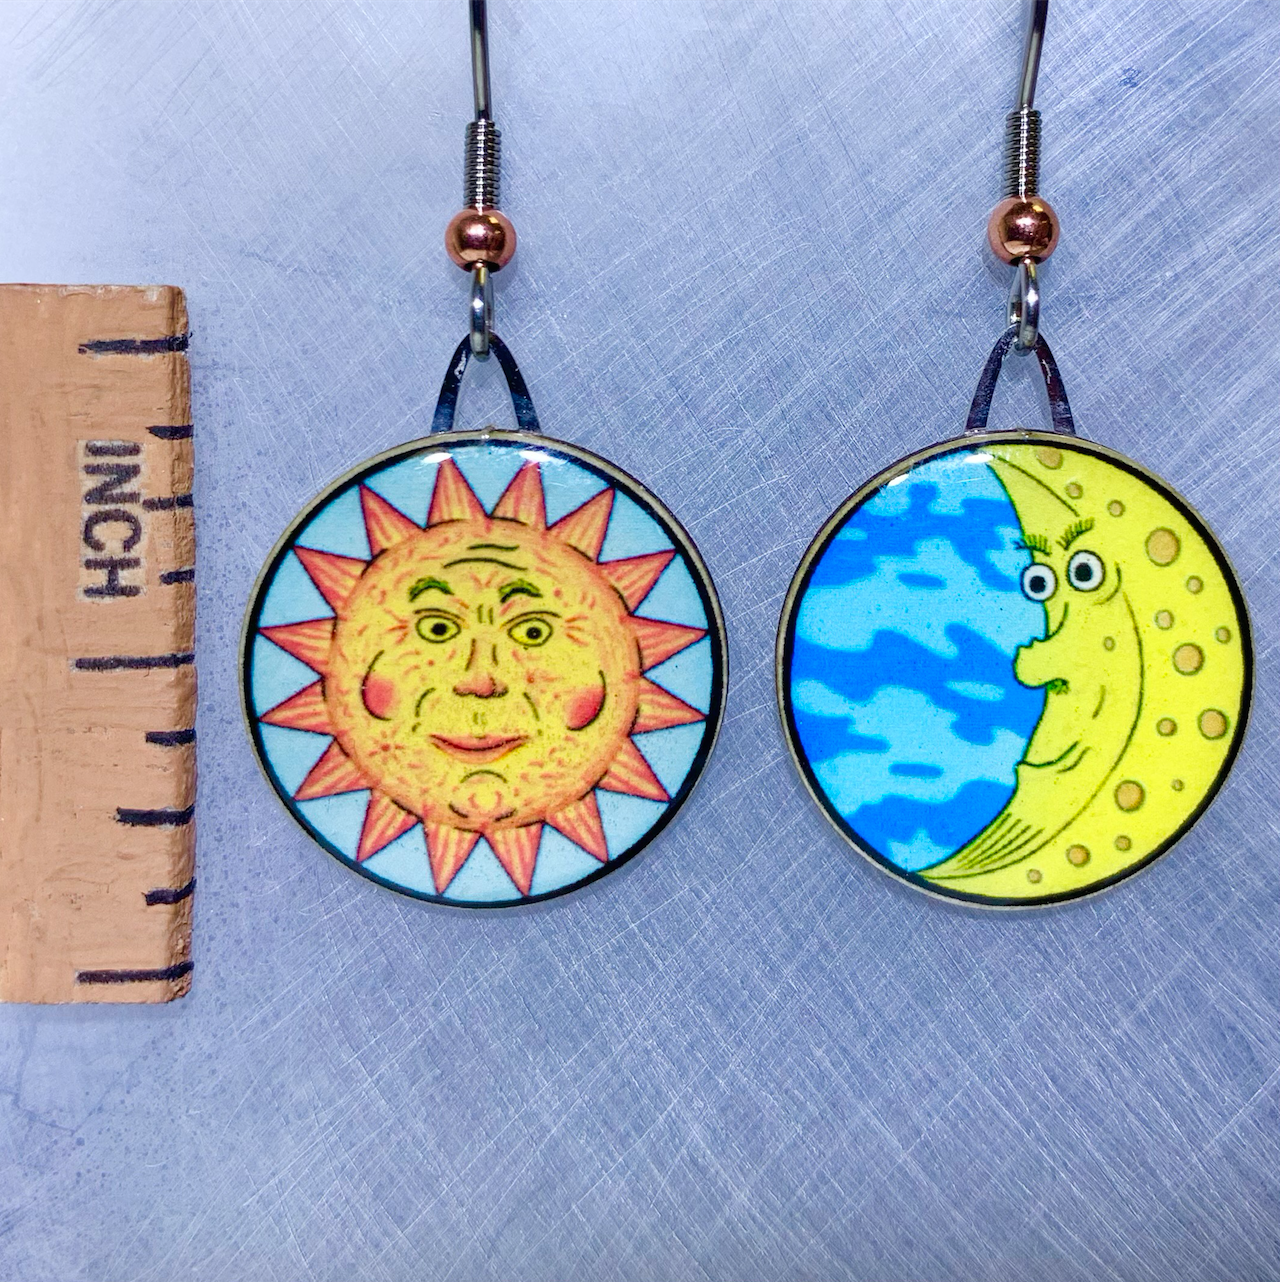 Picture shown is of 1 inch tall pair of earrings of Sun & Moon.